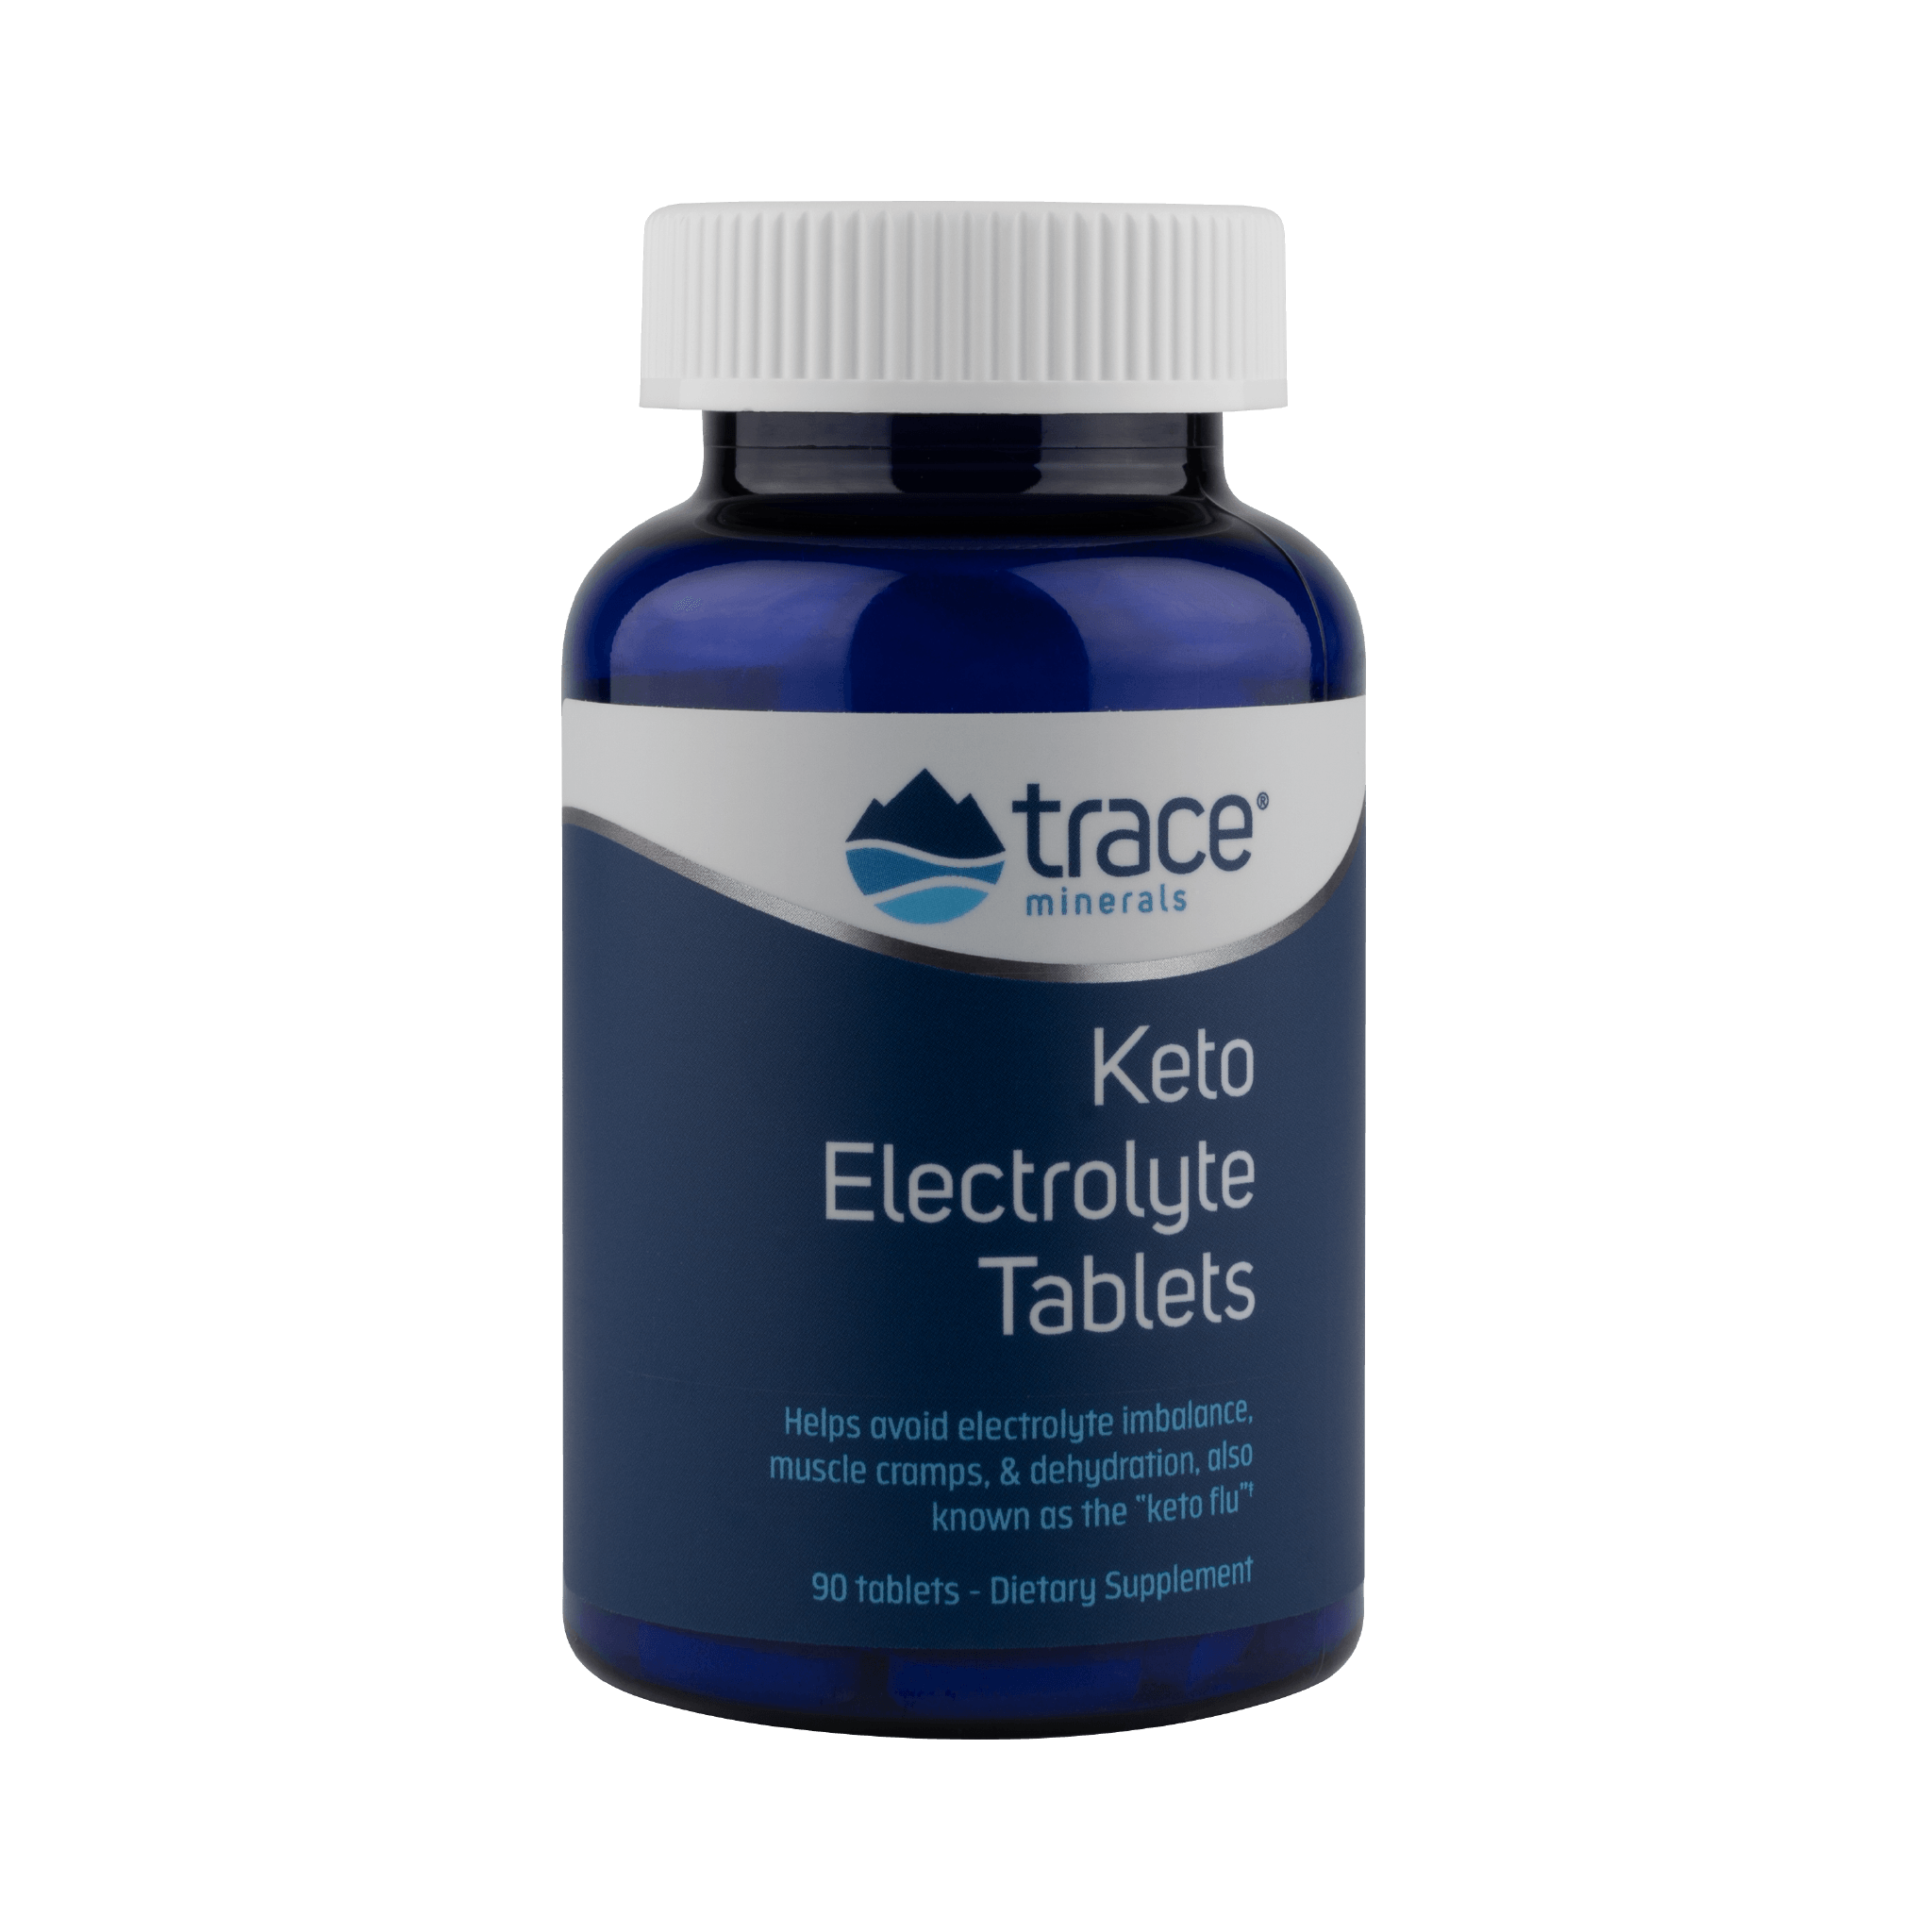 Keto Electrolyte Tablets - Trace Minerals